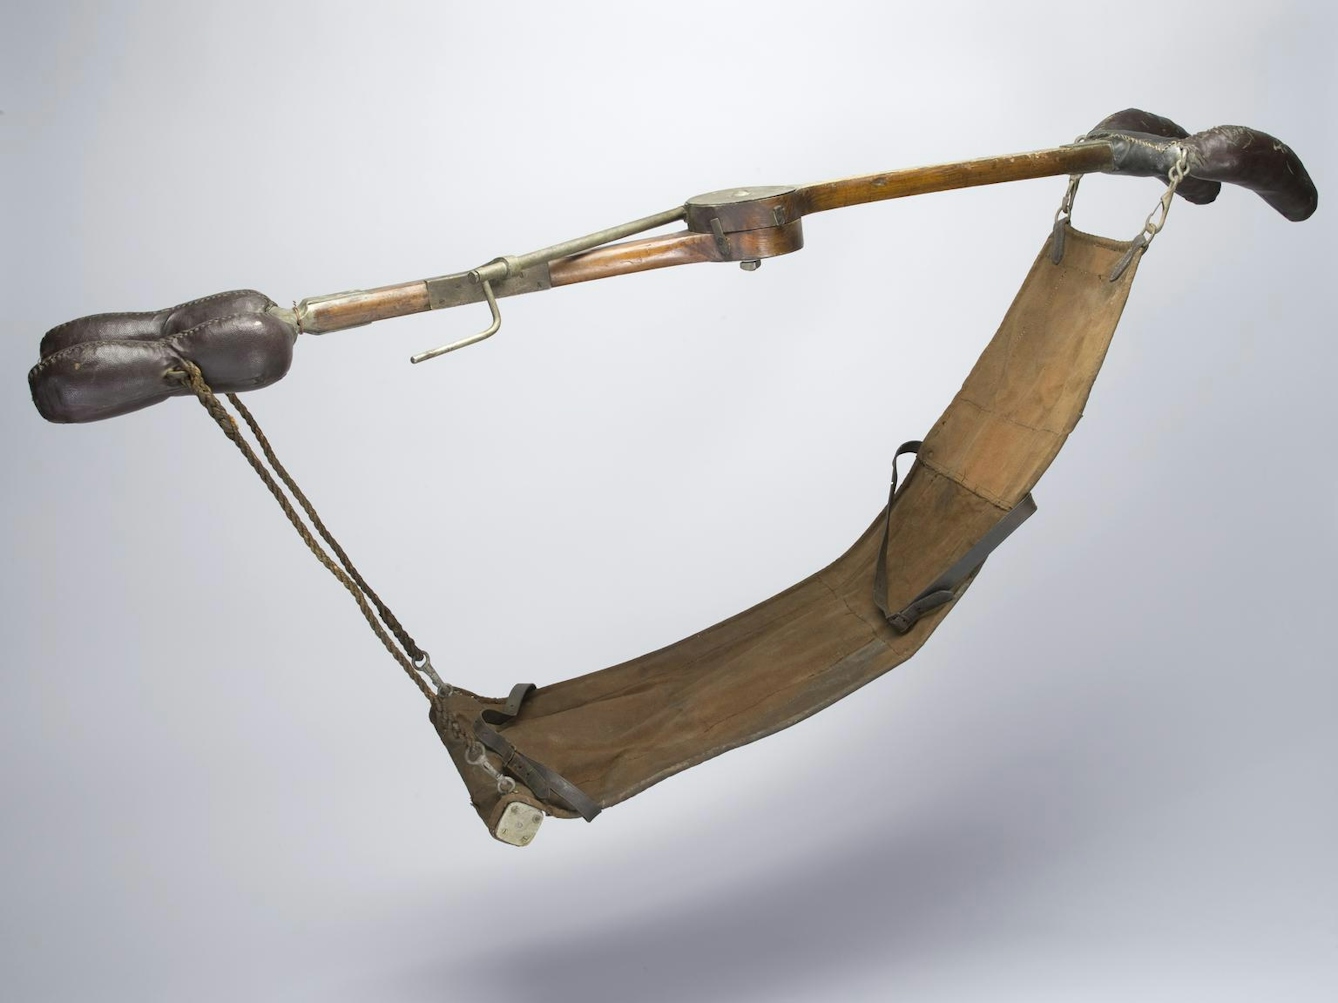 Image of stretcher with wooden rod and ends for holding.